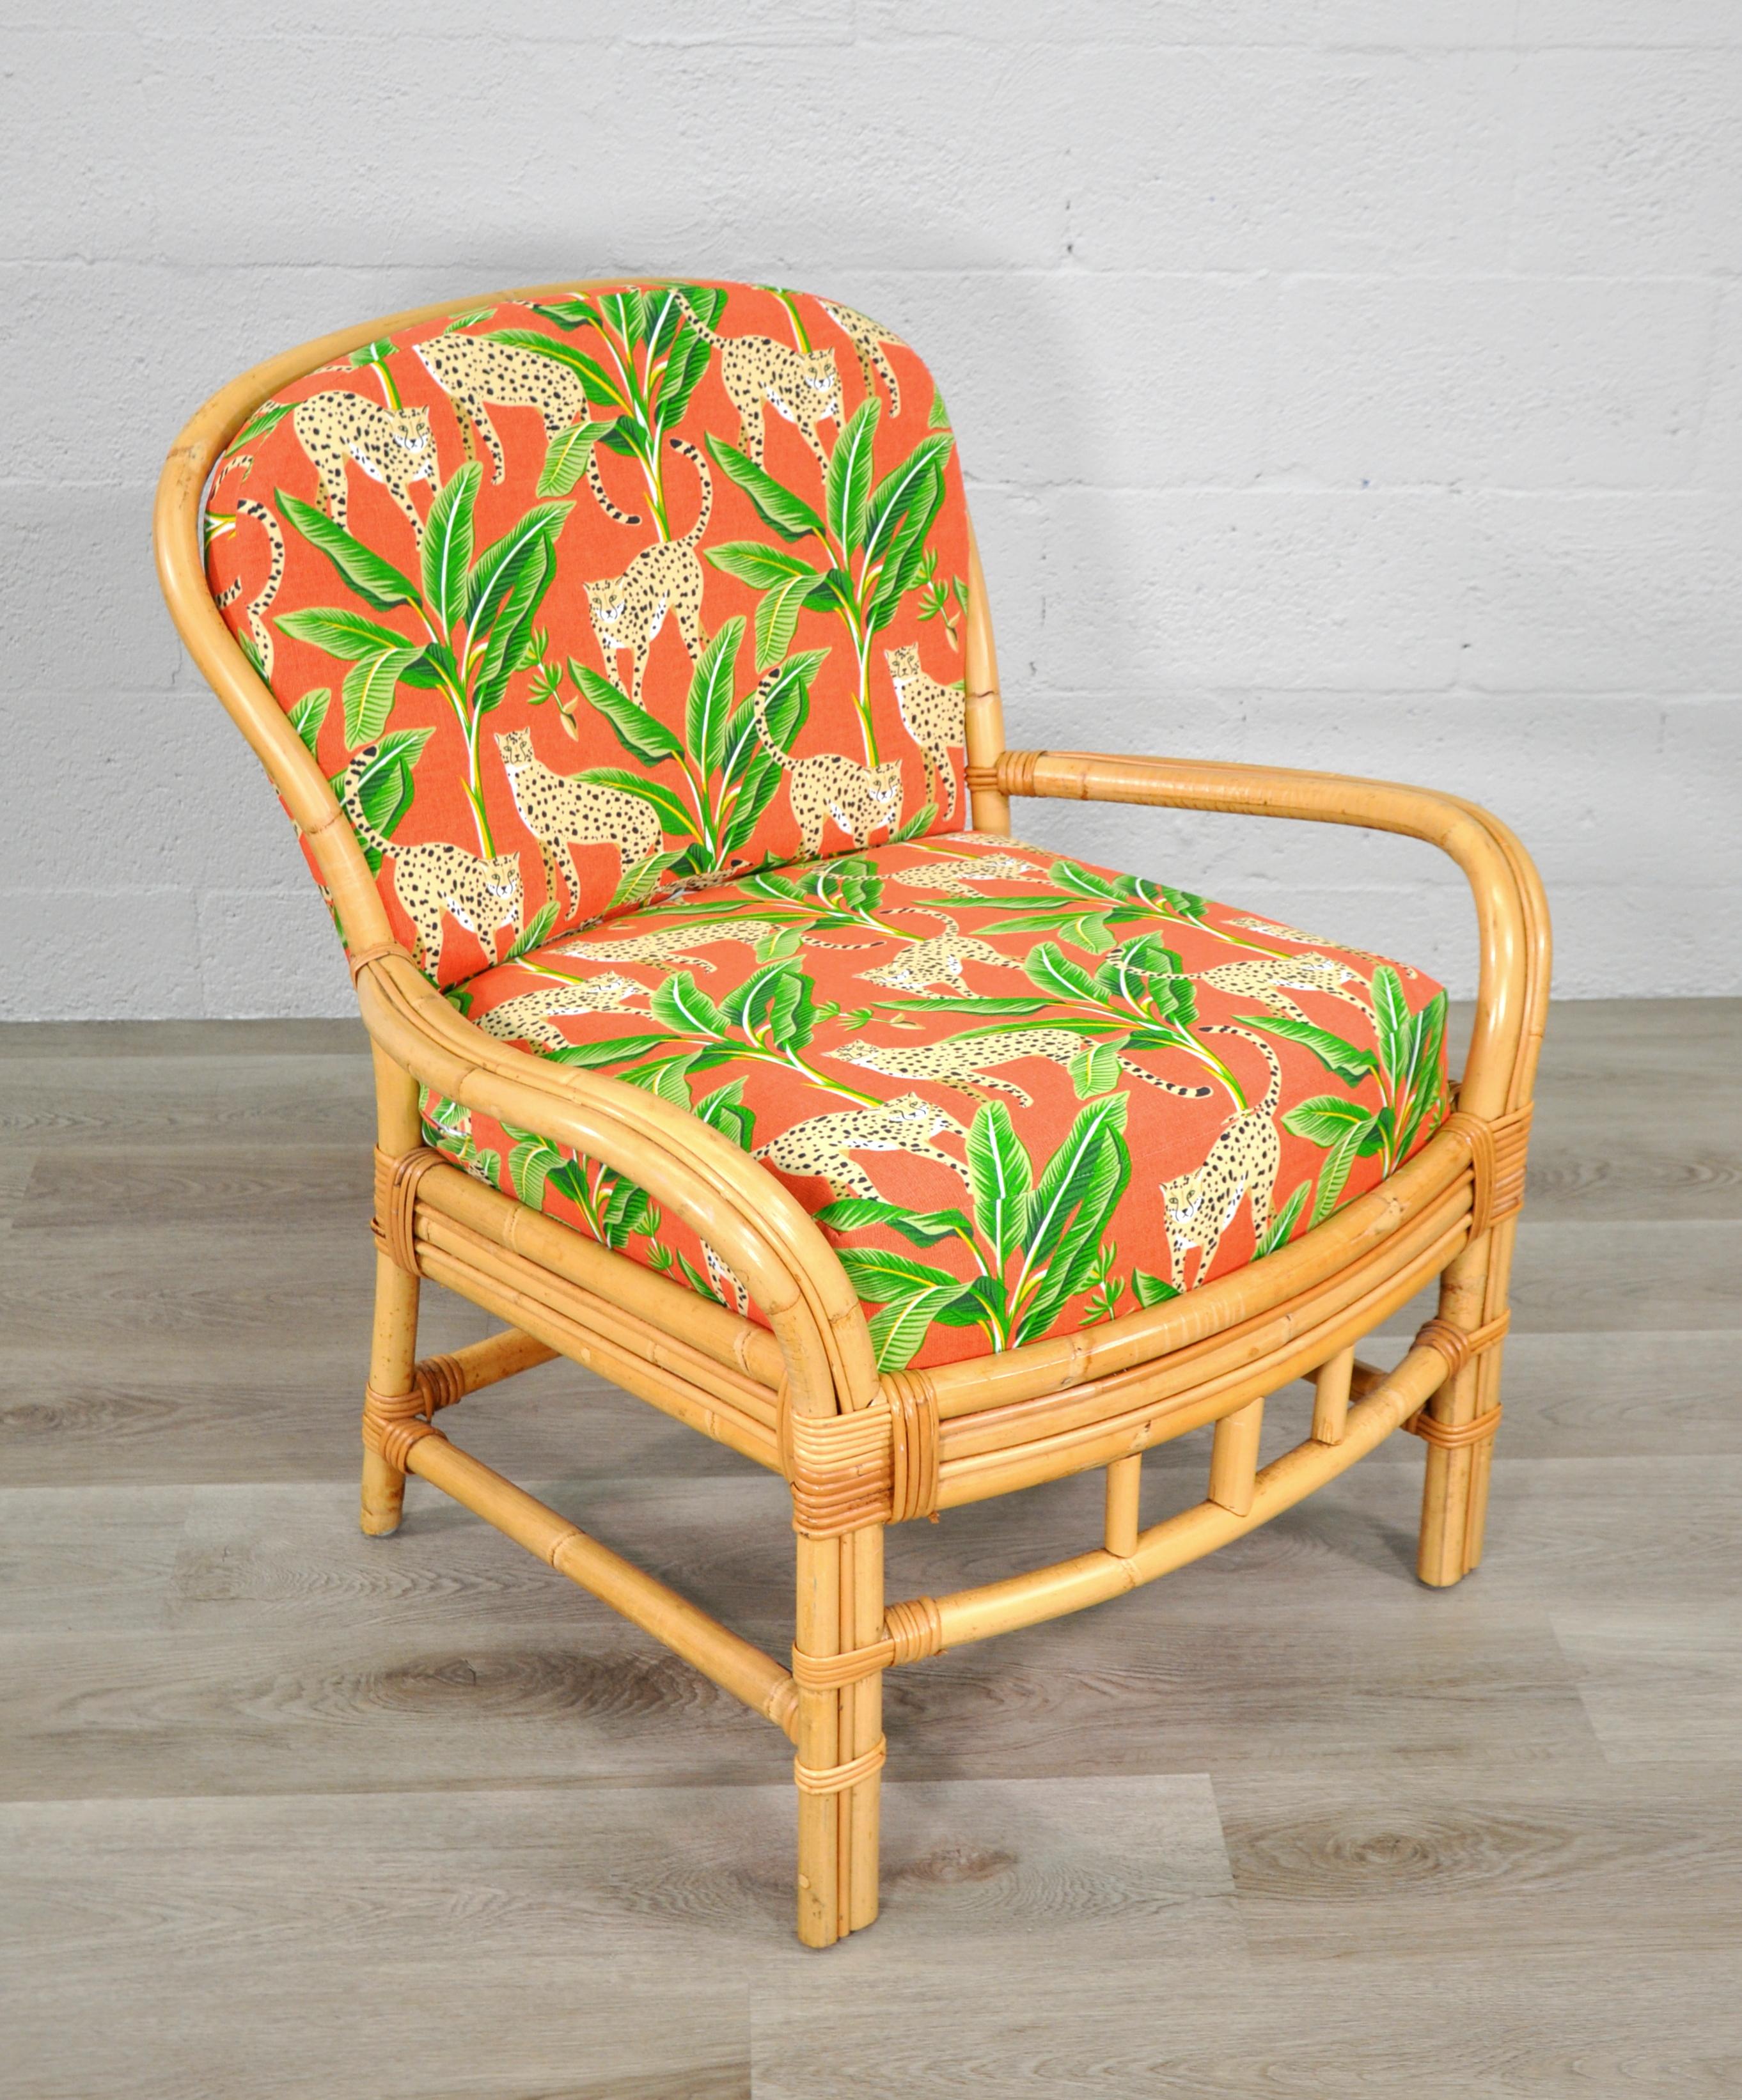 American Rattan Chair with Tropical Cheetah and Palm Fabric For Sale